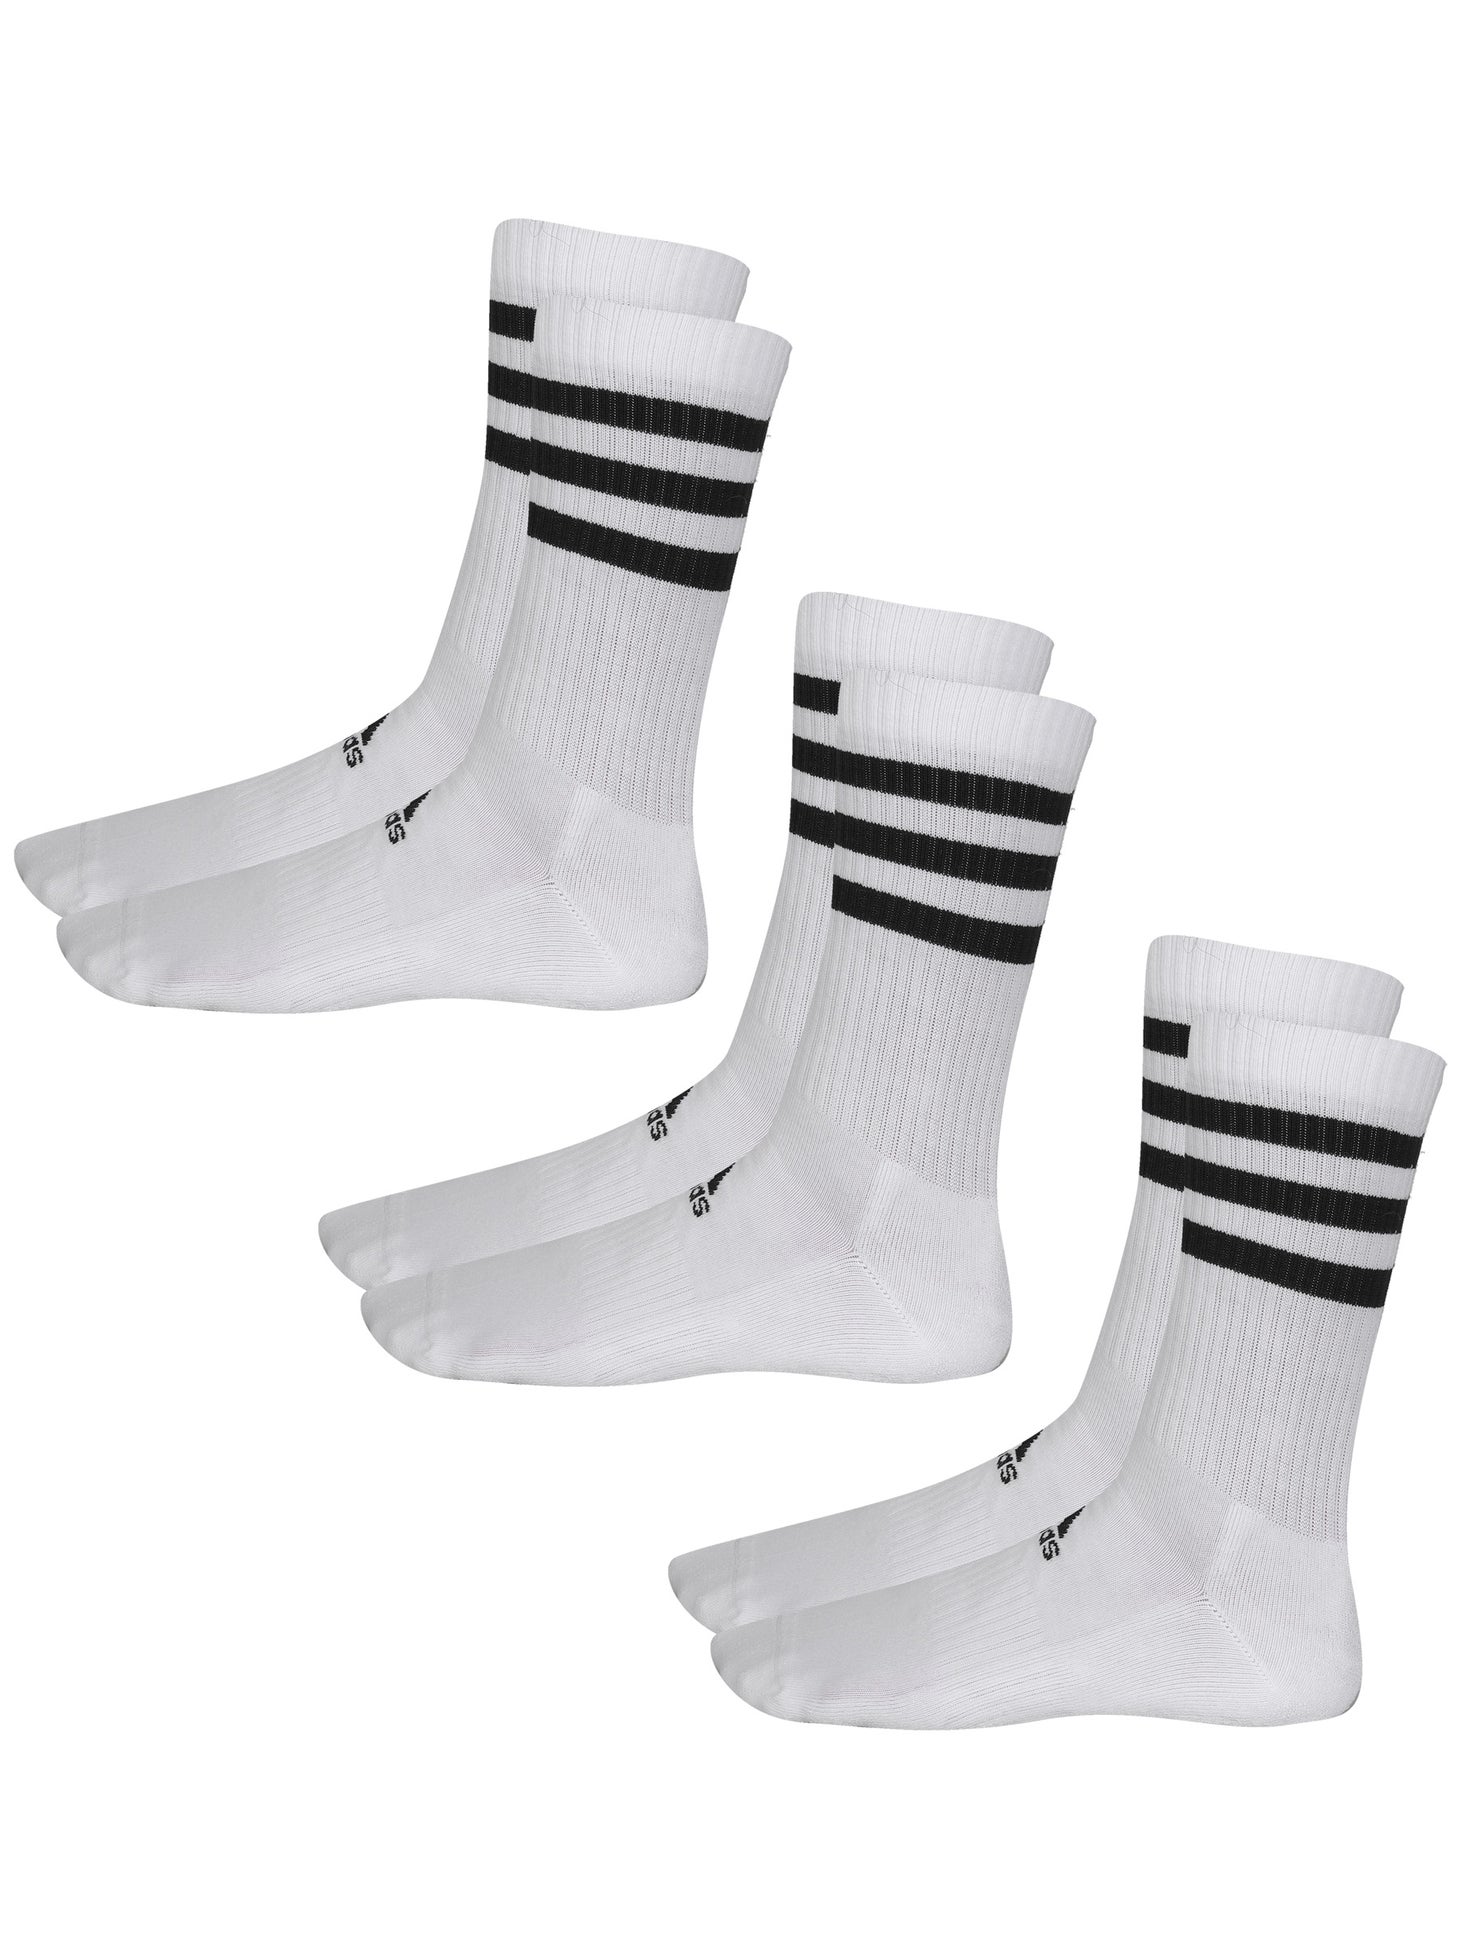 Adidas Cushion Crew 3-Pack Socks Striped White | Tennis Only